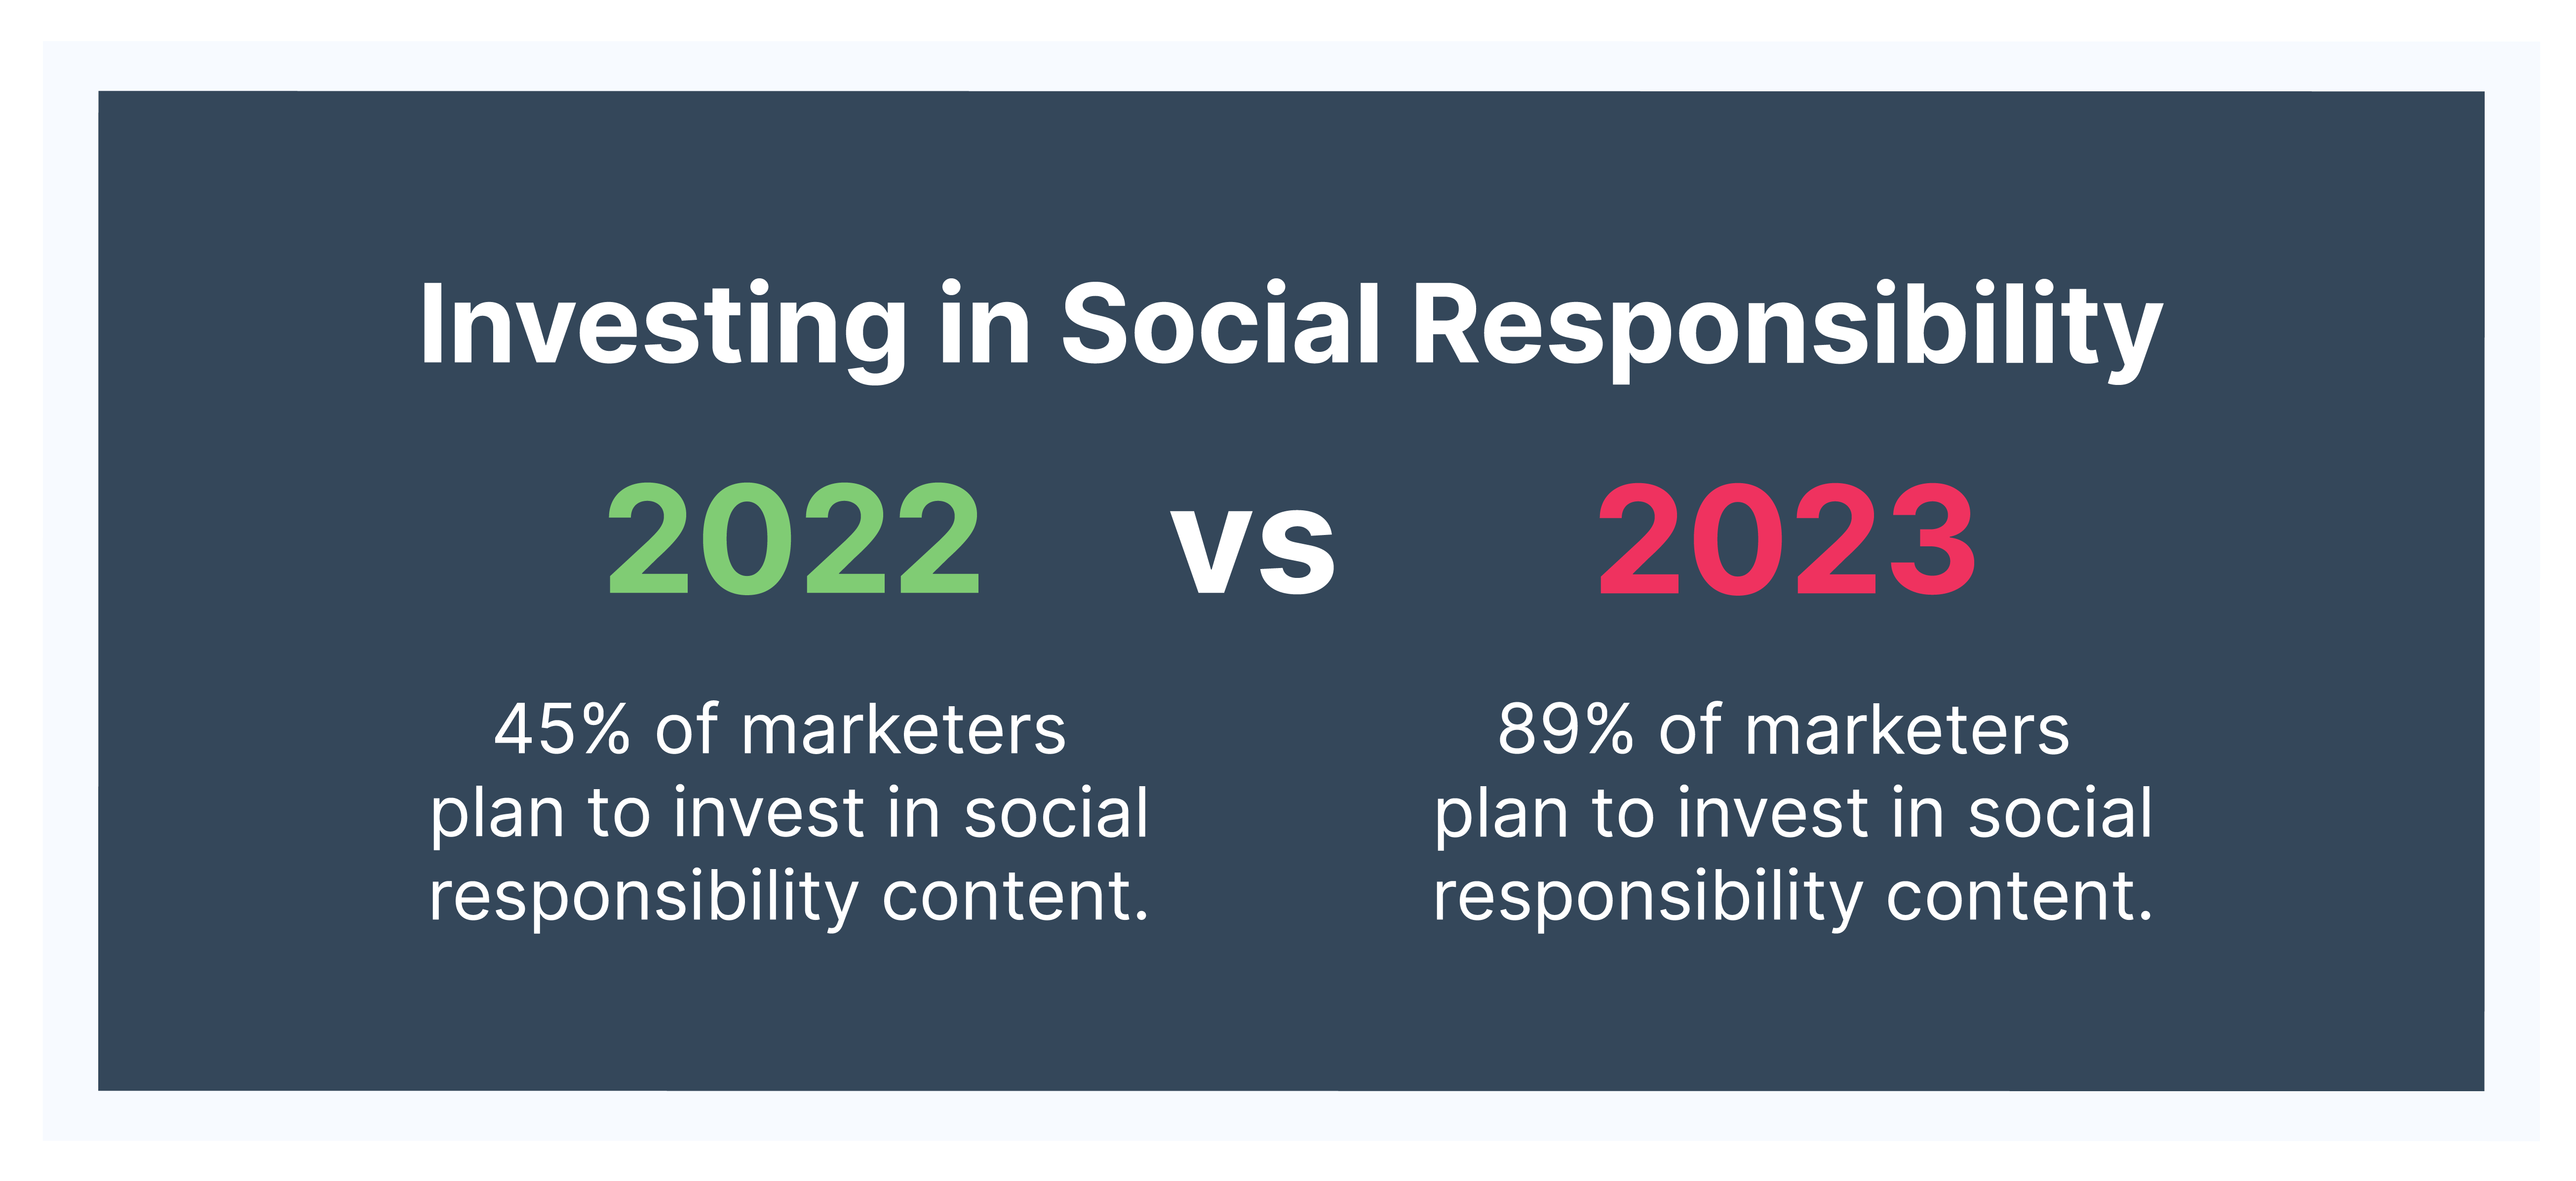 Top marketing trends 2023 investing in social responsibility